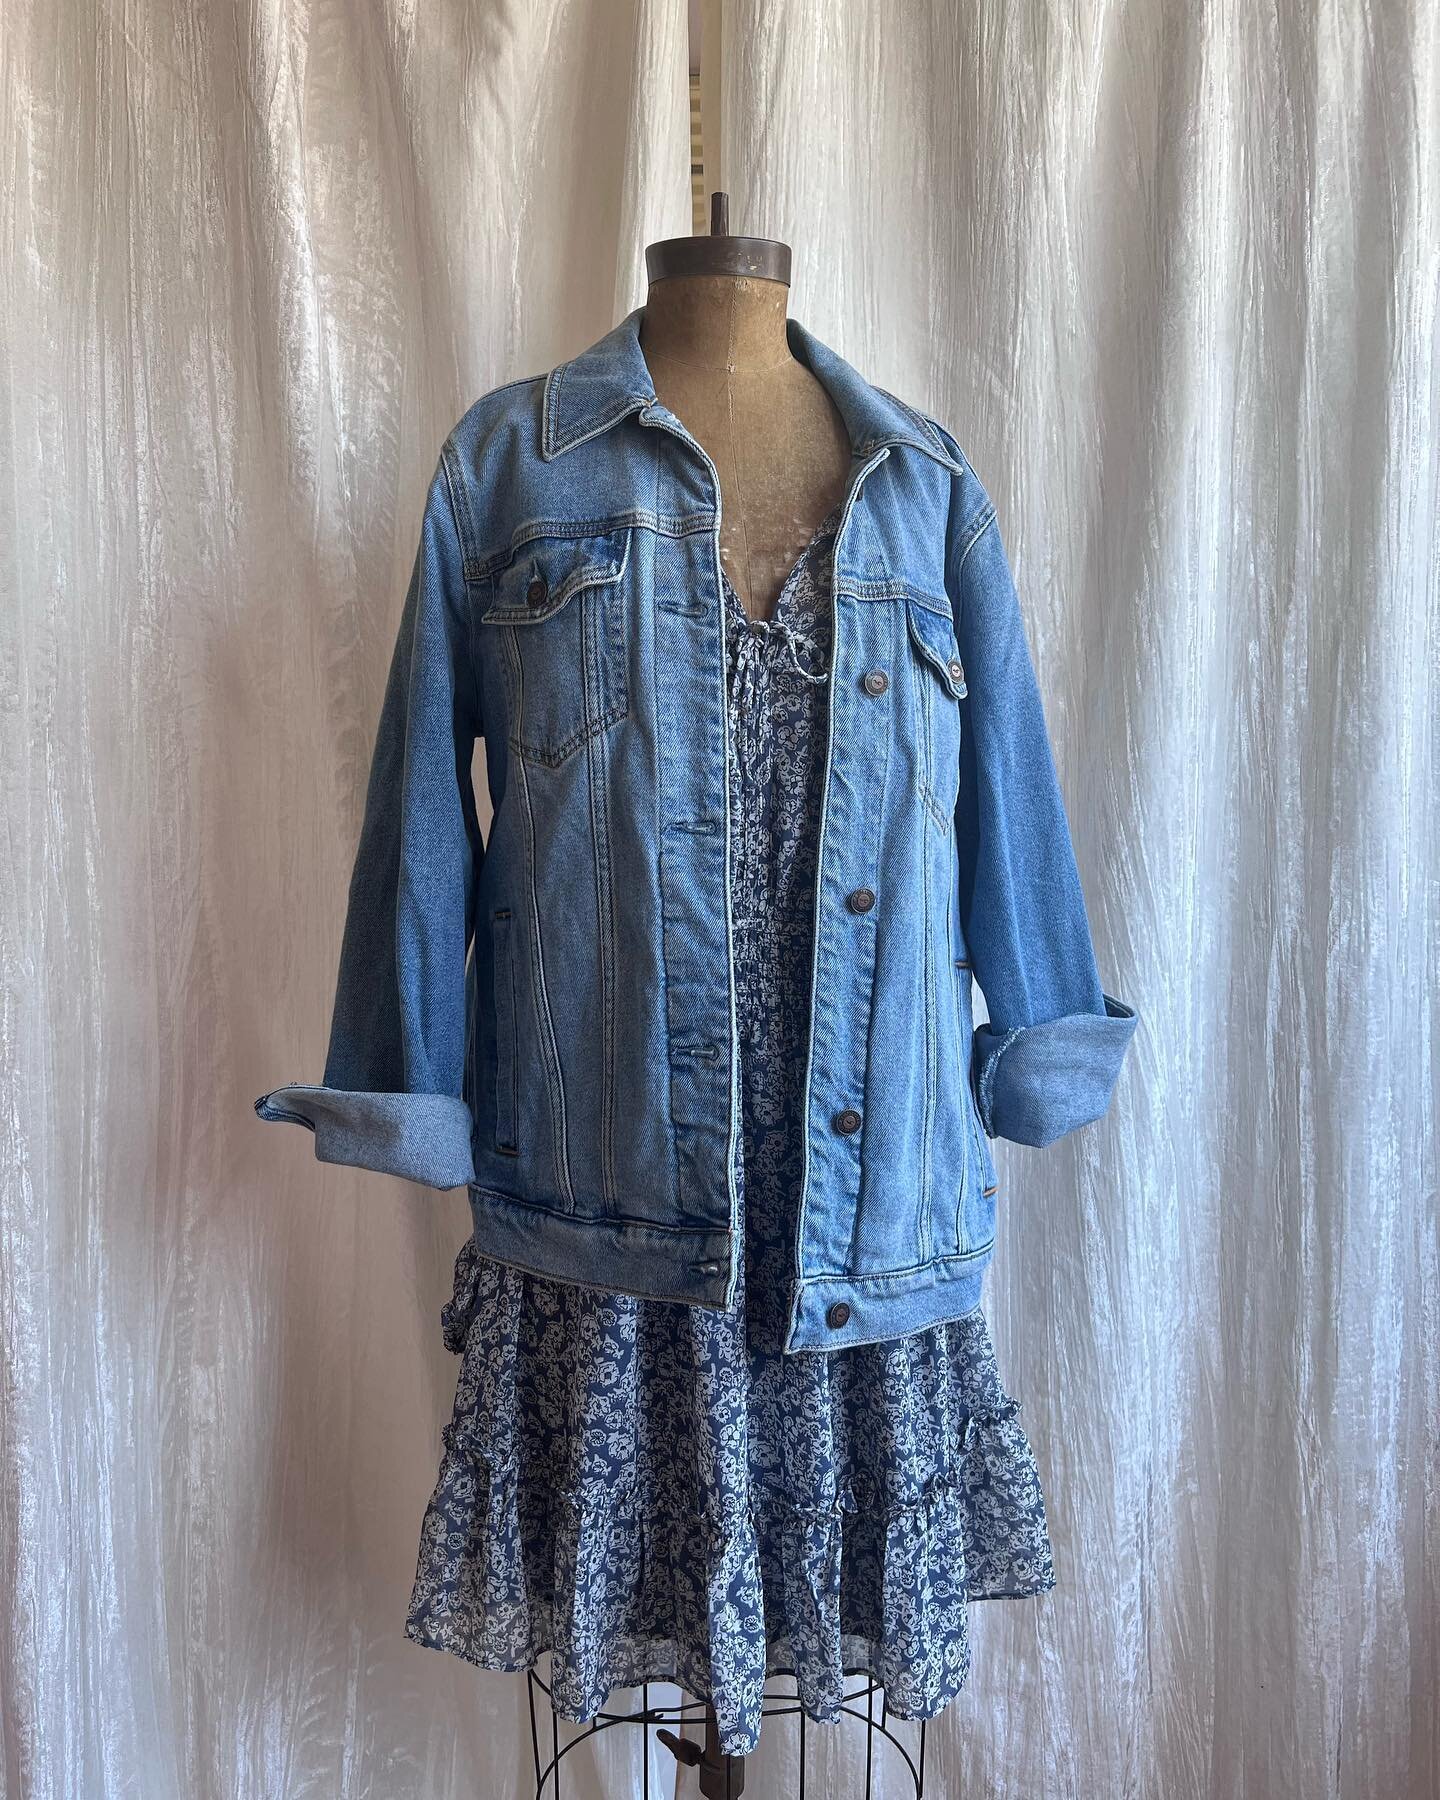 Highlighting some cute recently SOLD items! What do you want to see drop next?! Let us know in the comments!! Still some items left online at www.moxieandmine.com from the recent drop, too 💗💗💗 

#ygkshopping #vintageshop #consignmentshop #thrifted